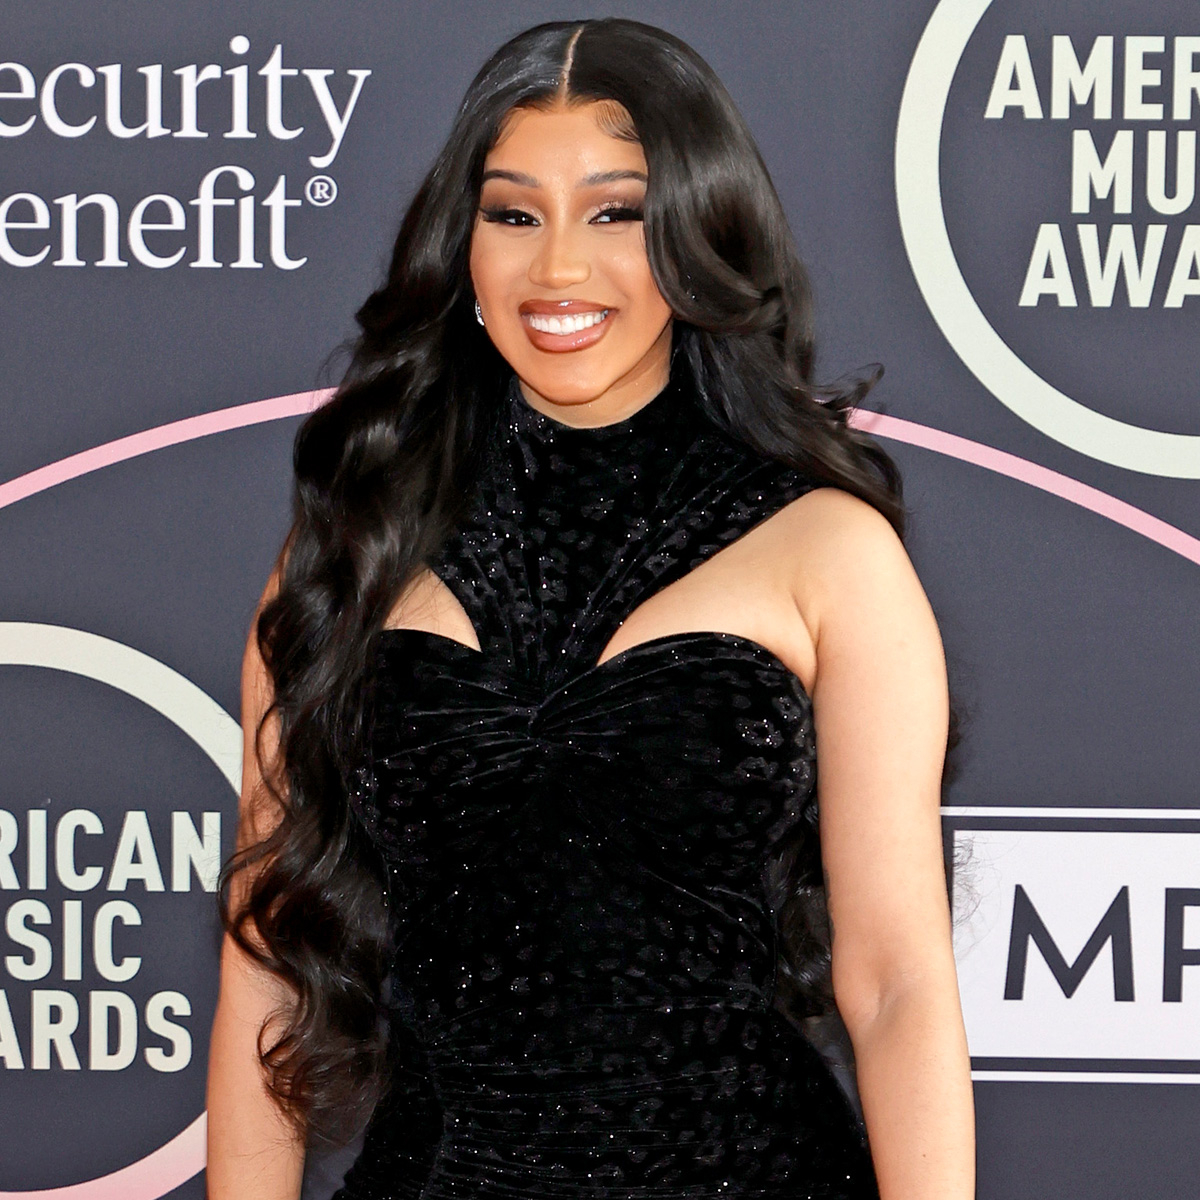 Cardi B selected to host 2021 American Music Awards show